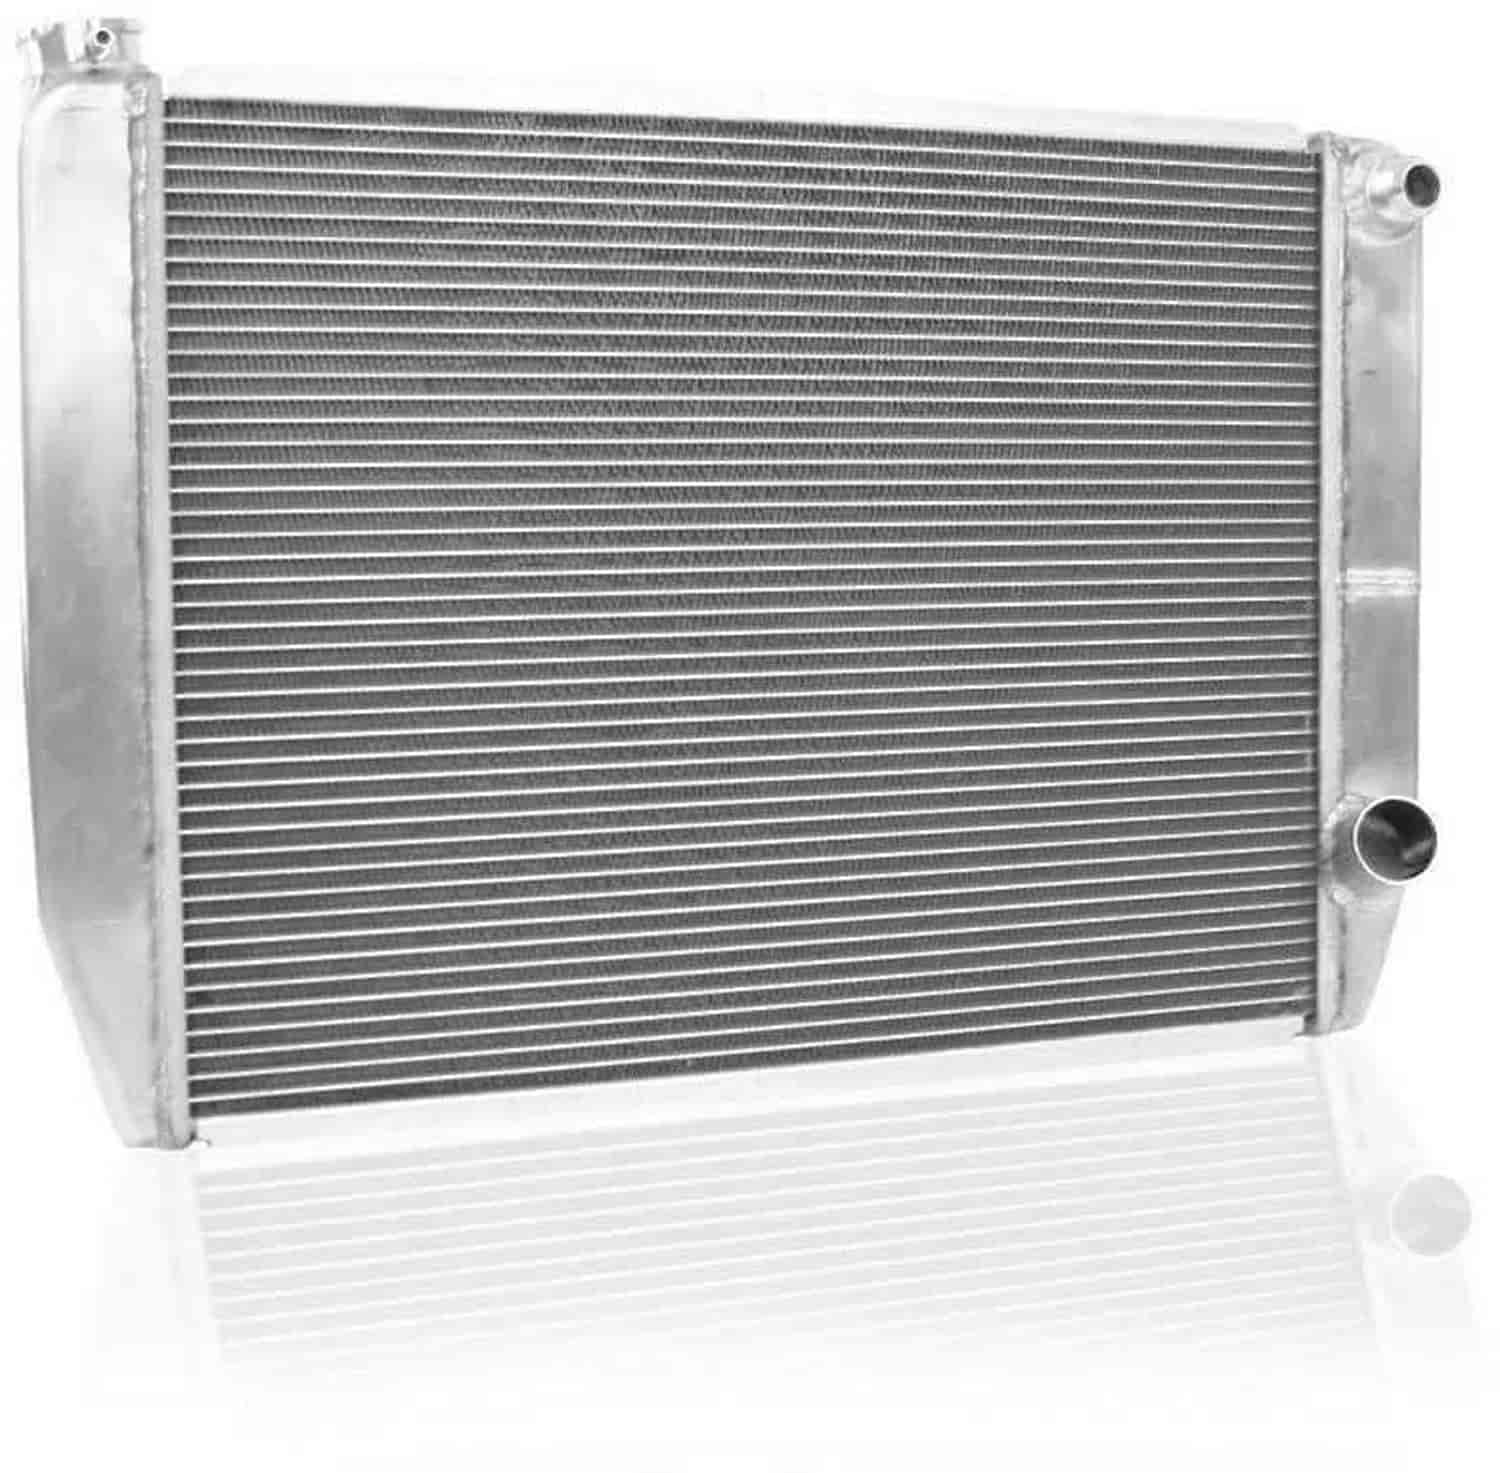 MegaCool Universal Fit Radiator Dual Pass Crossflow Design 27.50" x 19" with 16AN Inlet